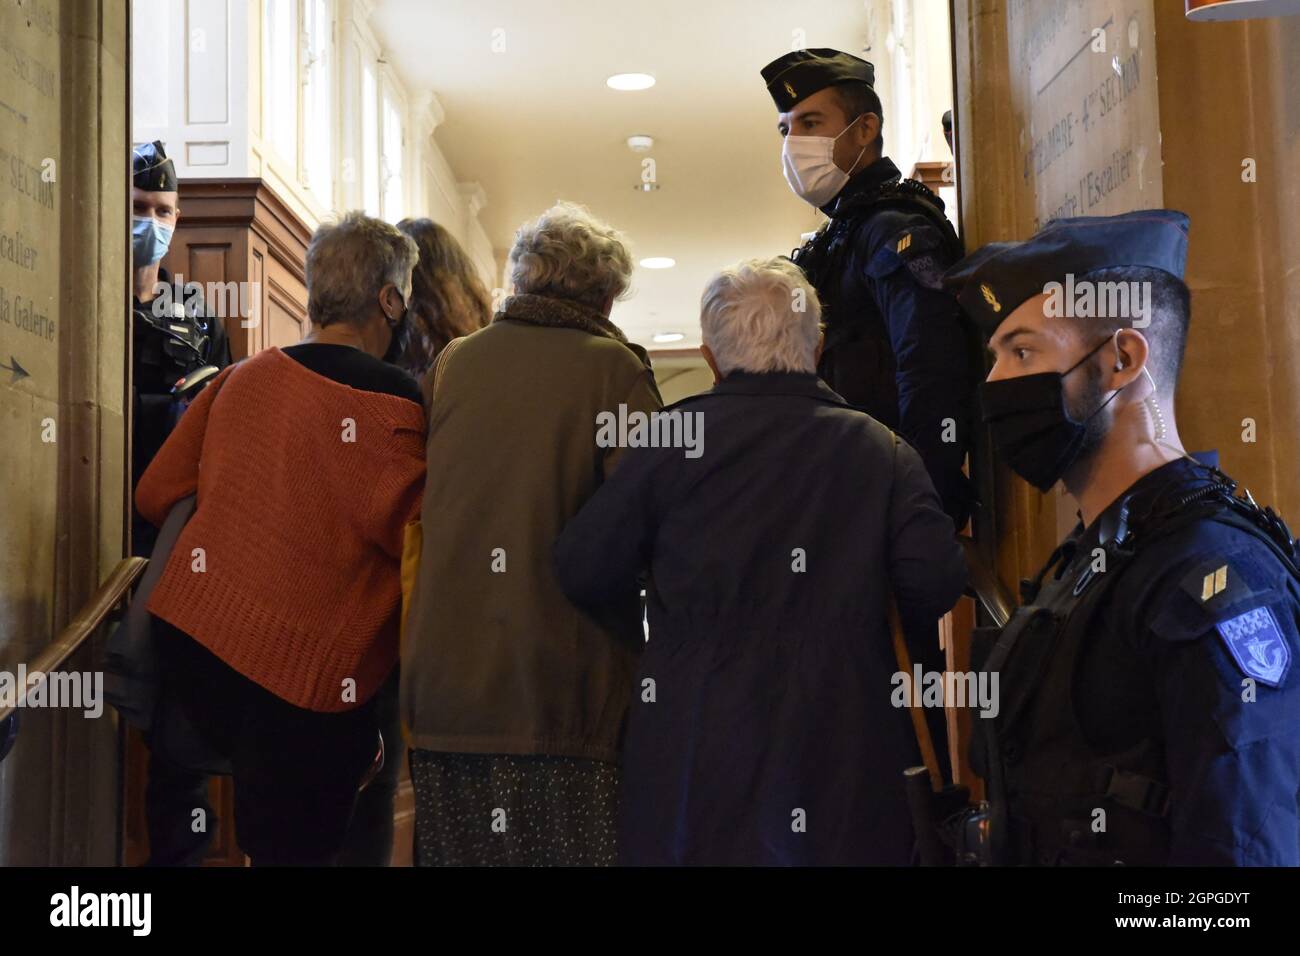 Ex-Memeber of the Red Brigates, Marina Petrella - Trial of 7 Ex Italian Red Brigades for their extradition to Italy, at the courthouse in Paris, France, on September 29, 2021. The trial postponed to January 12, 2022. Photo by Patrice Pierrot/Avenir Pictures/ABACAPRESS.COM Stock Photo